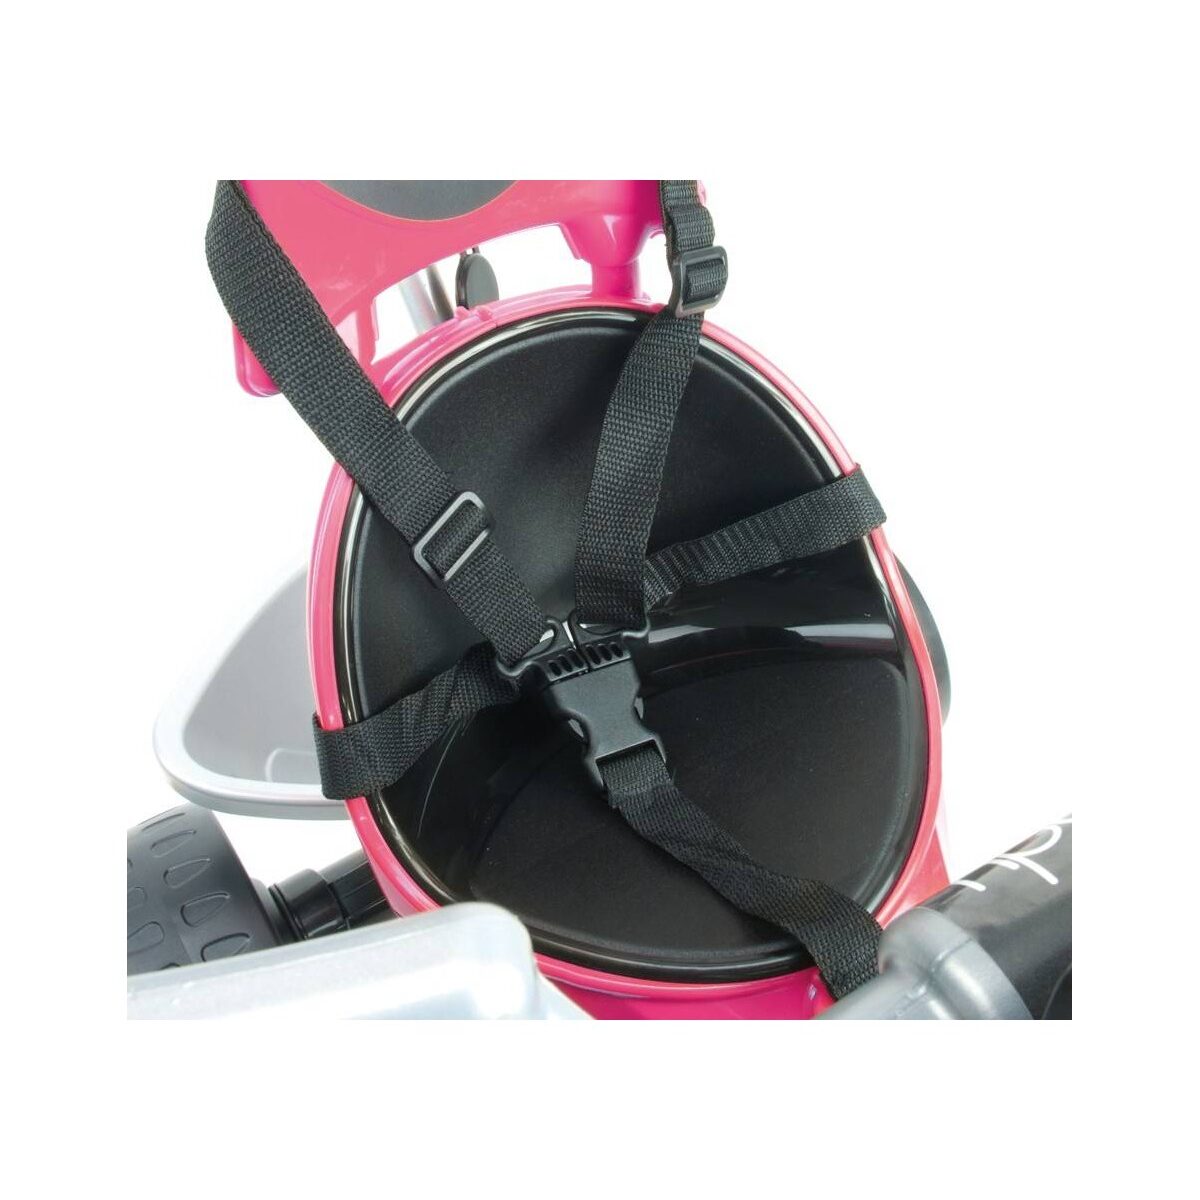 Little Tikes Cyprus - triciclo body sport rosa injusa 1 1